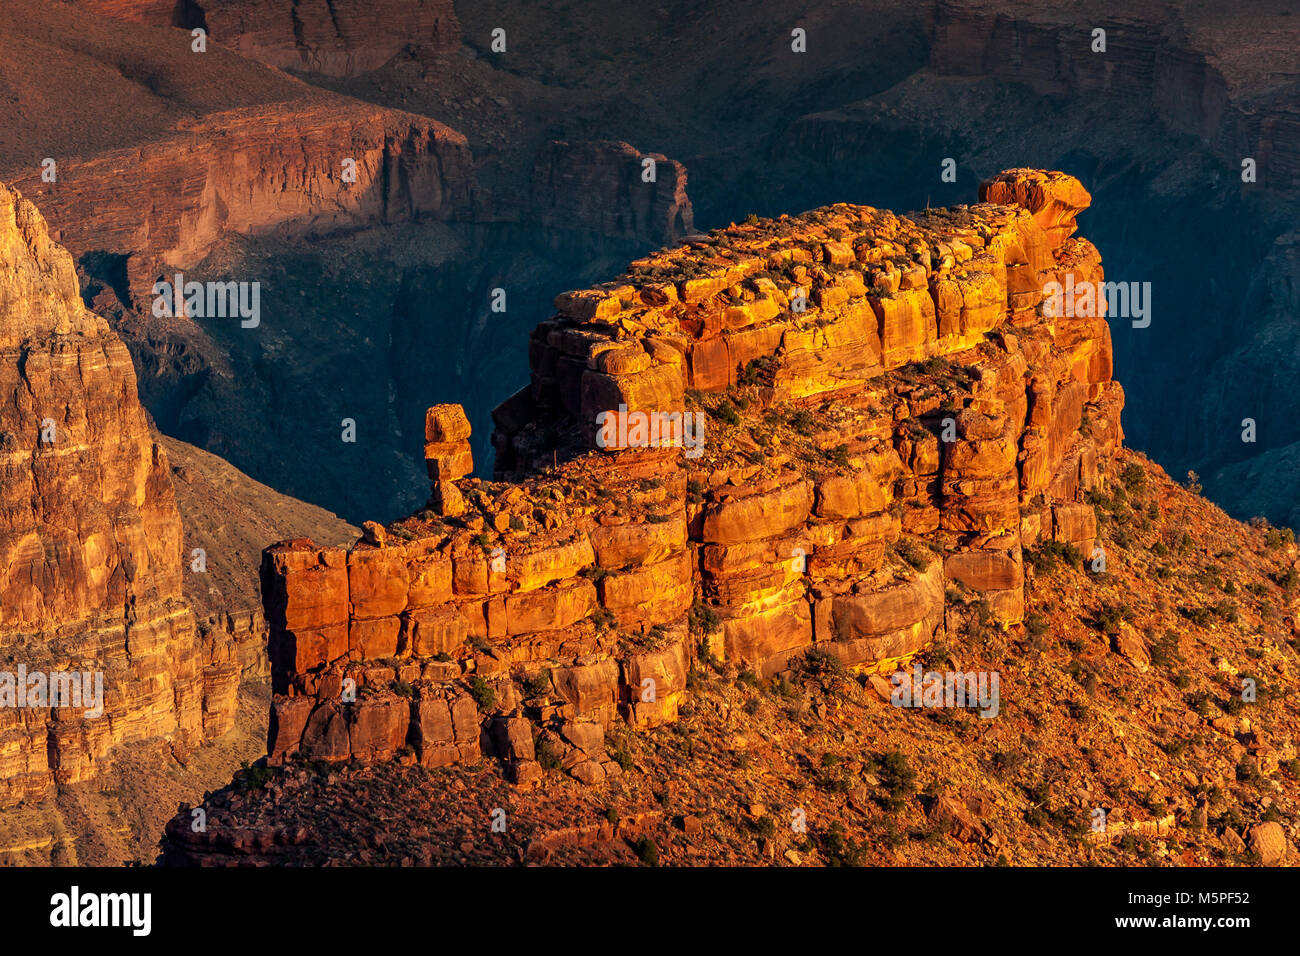 Sunrise at The Grand Canyon, the rising sun picks out interesting rock formations near Yaki Point at The Canyon's South Rim, Arizona ,USA Stock Photo